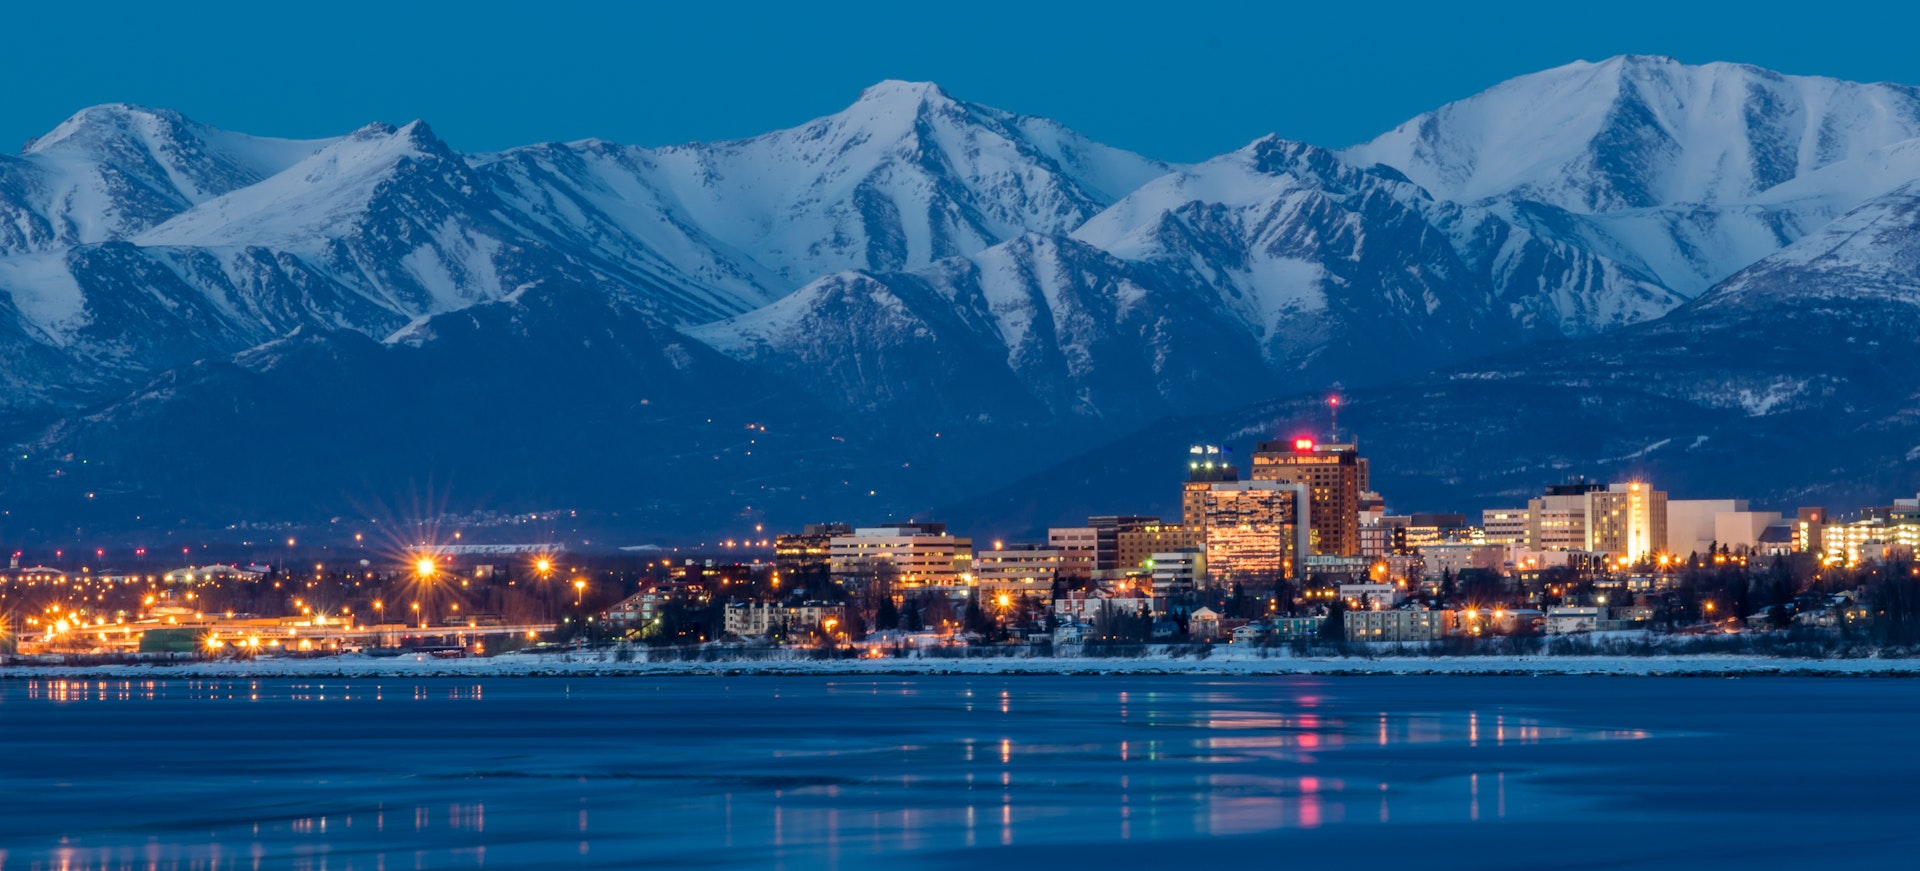 The skyline of Anchorage in Alaska lit up at night